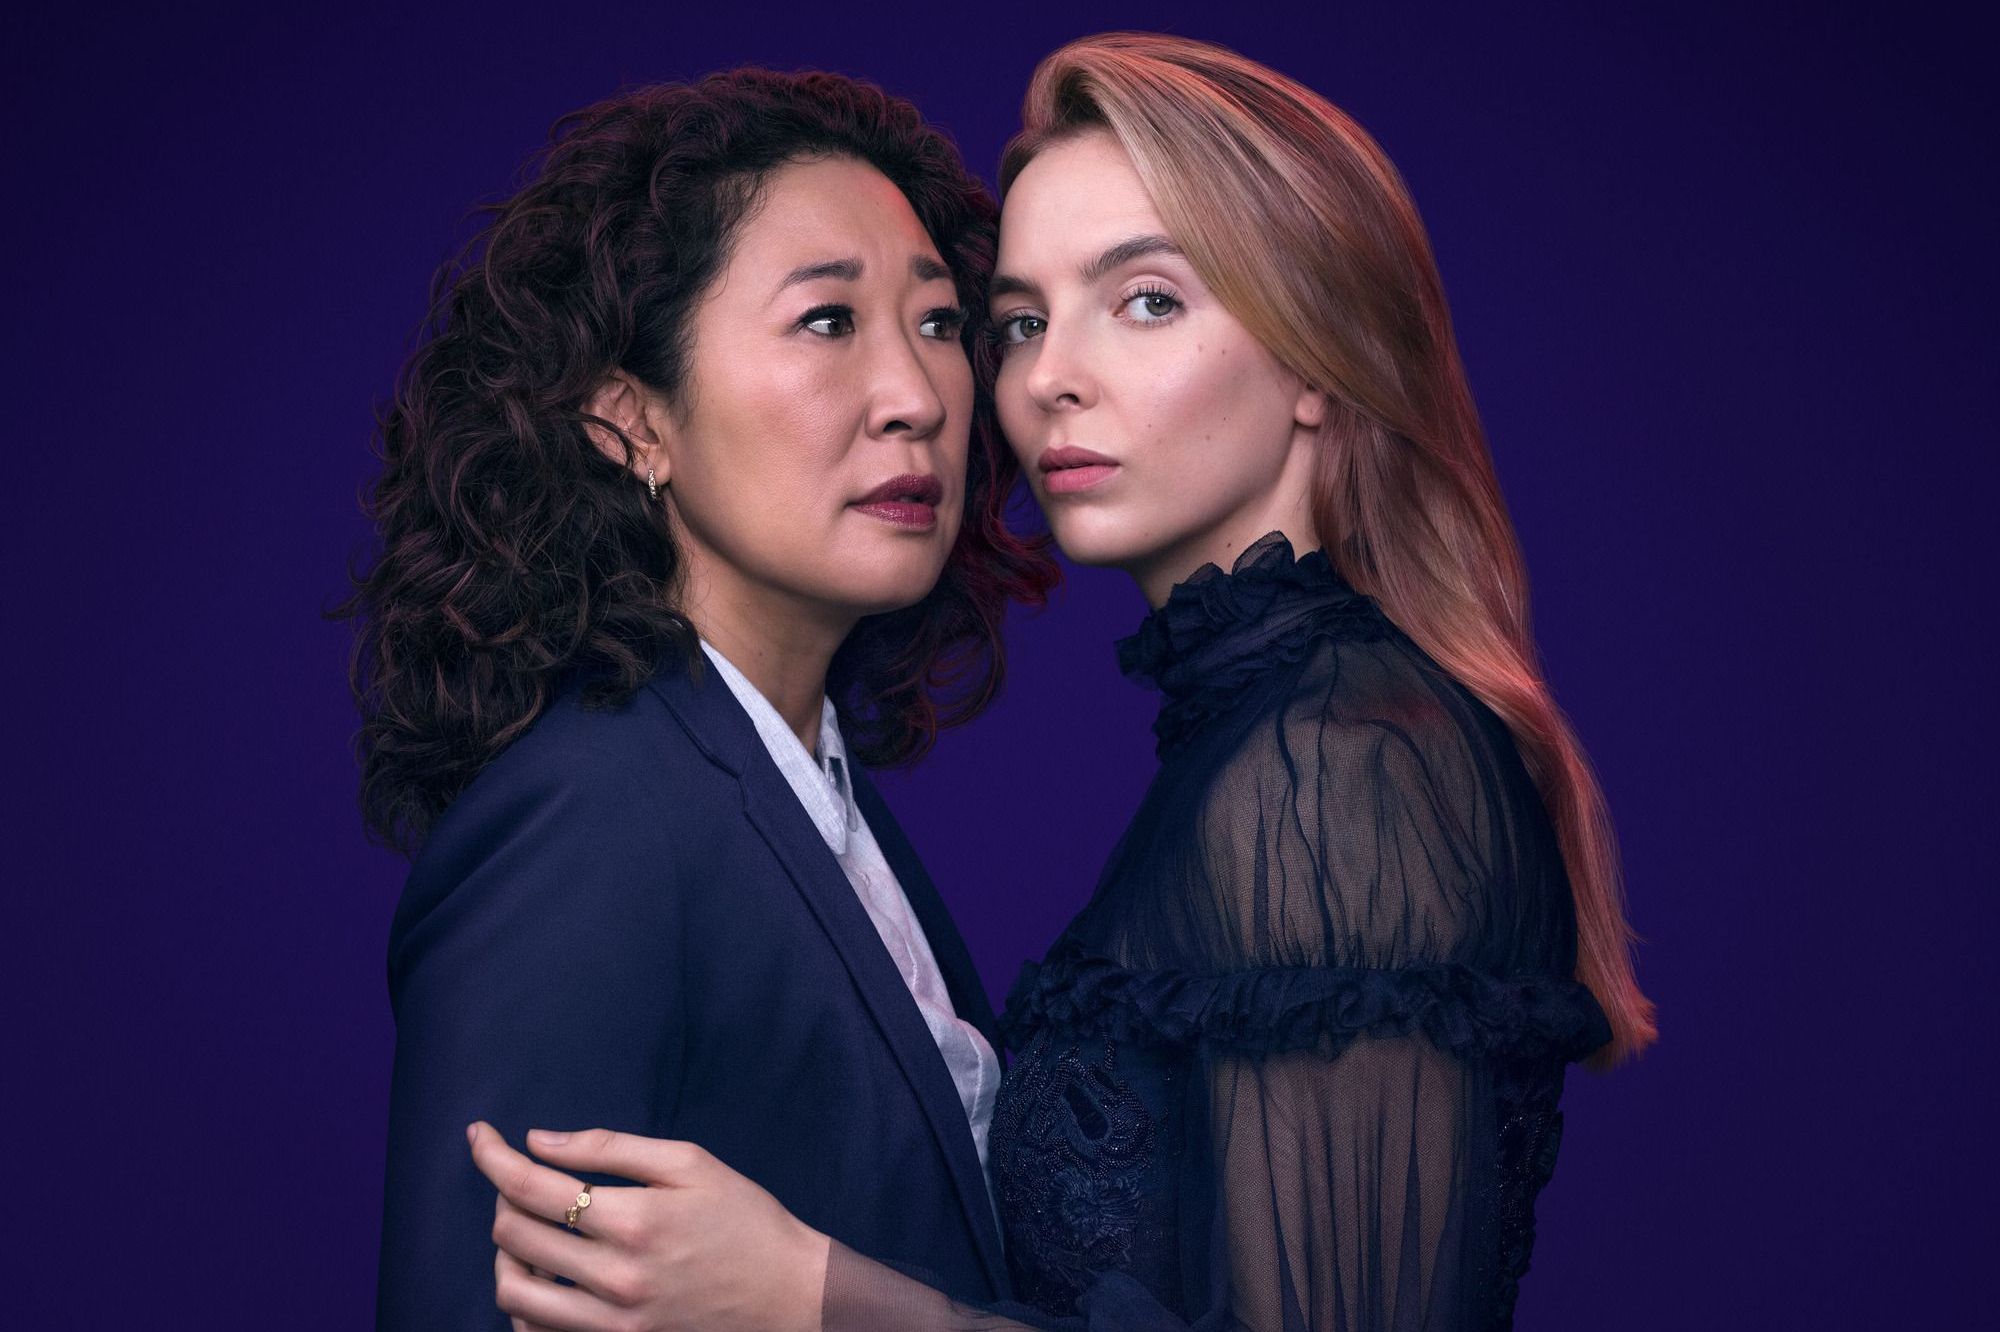 Villanelle and Eve holding eachother while Villanelle is looking at the camera in a purple background.